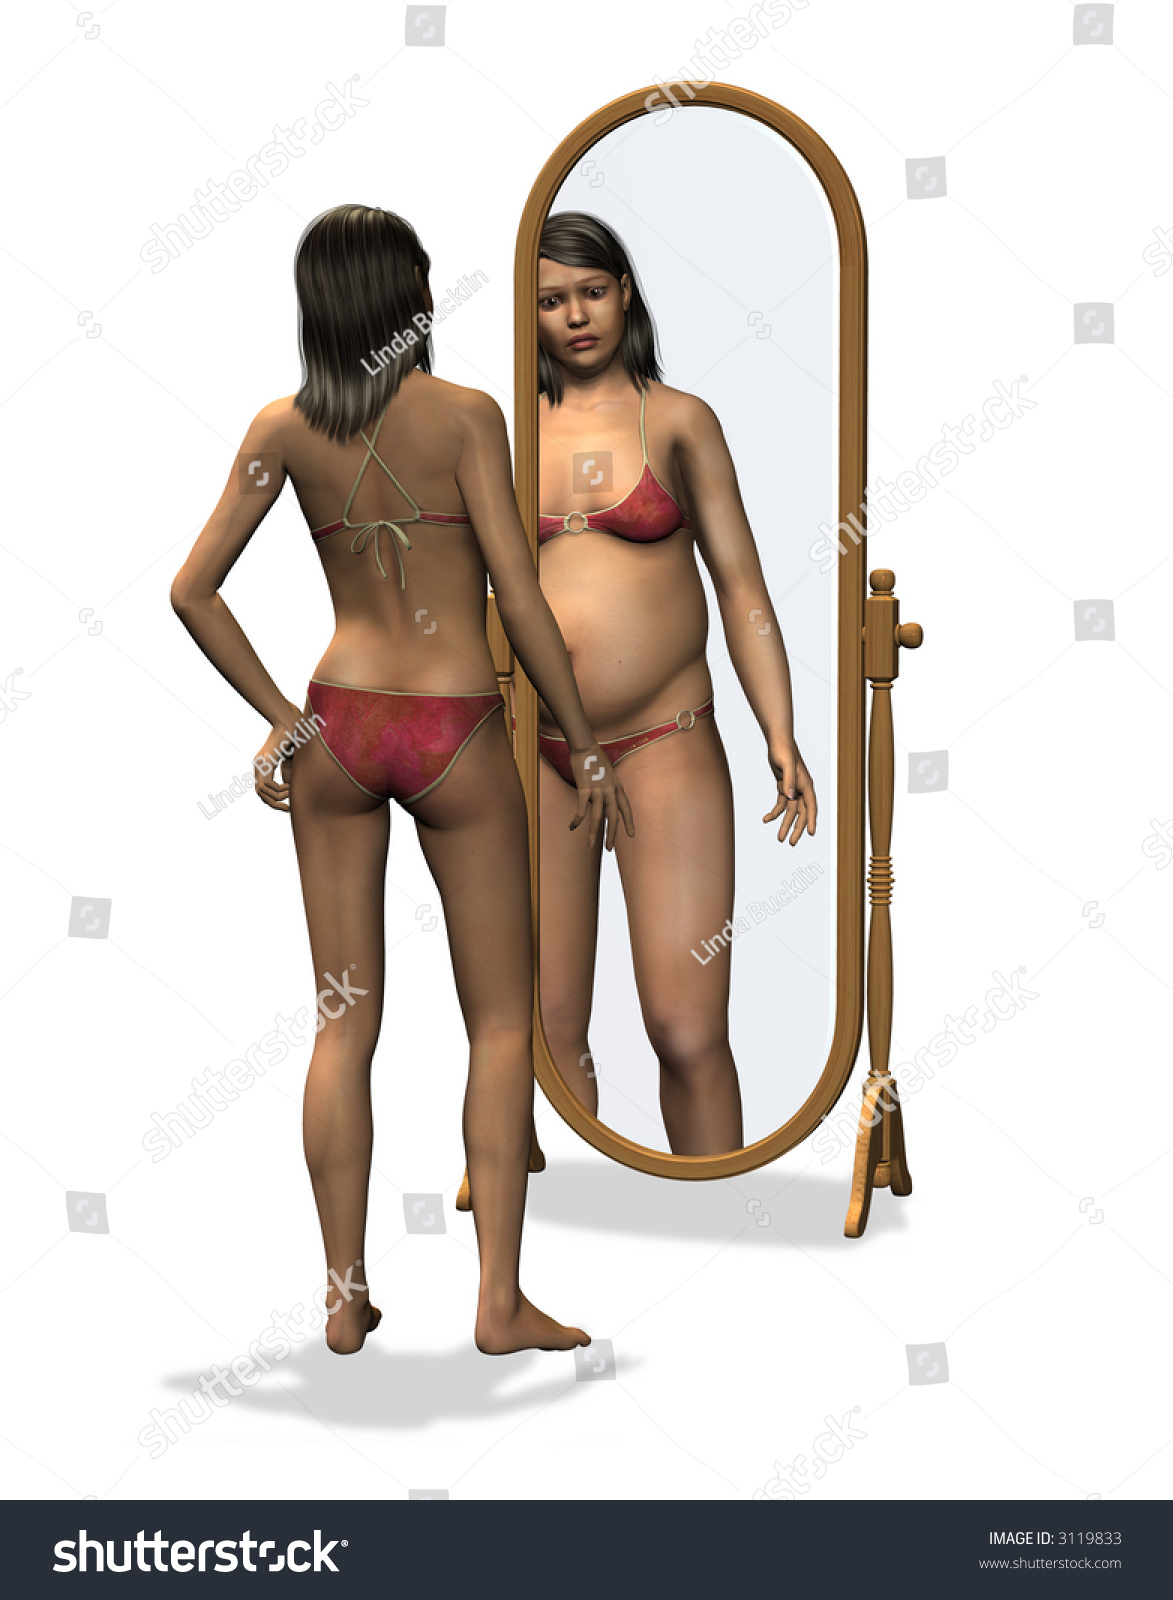 Distorted Body Image Many Teens 59